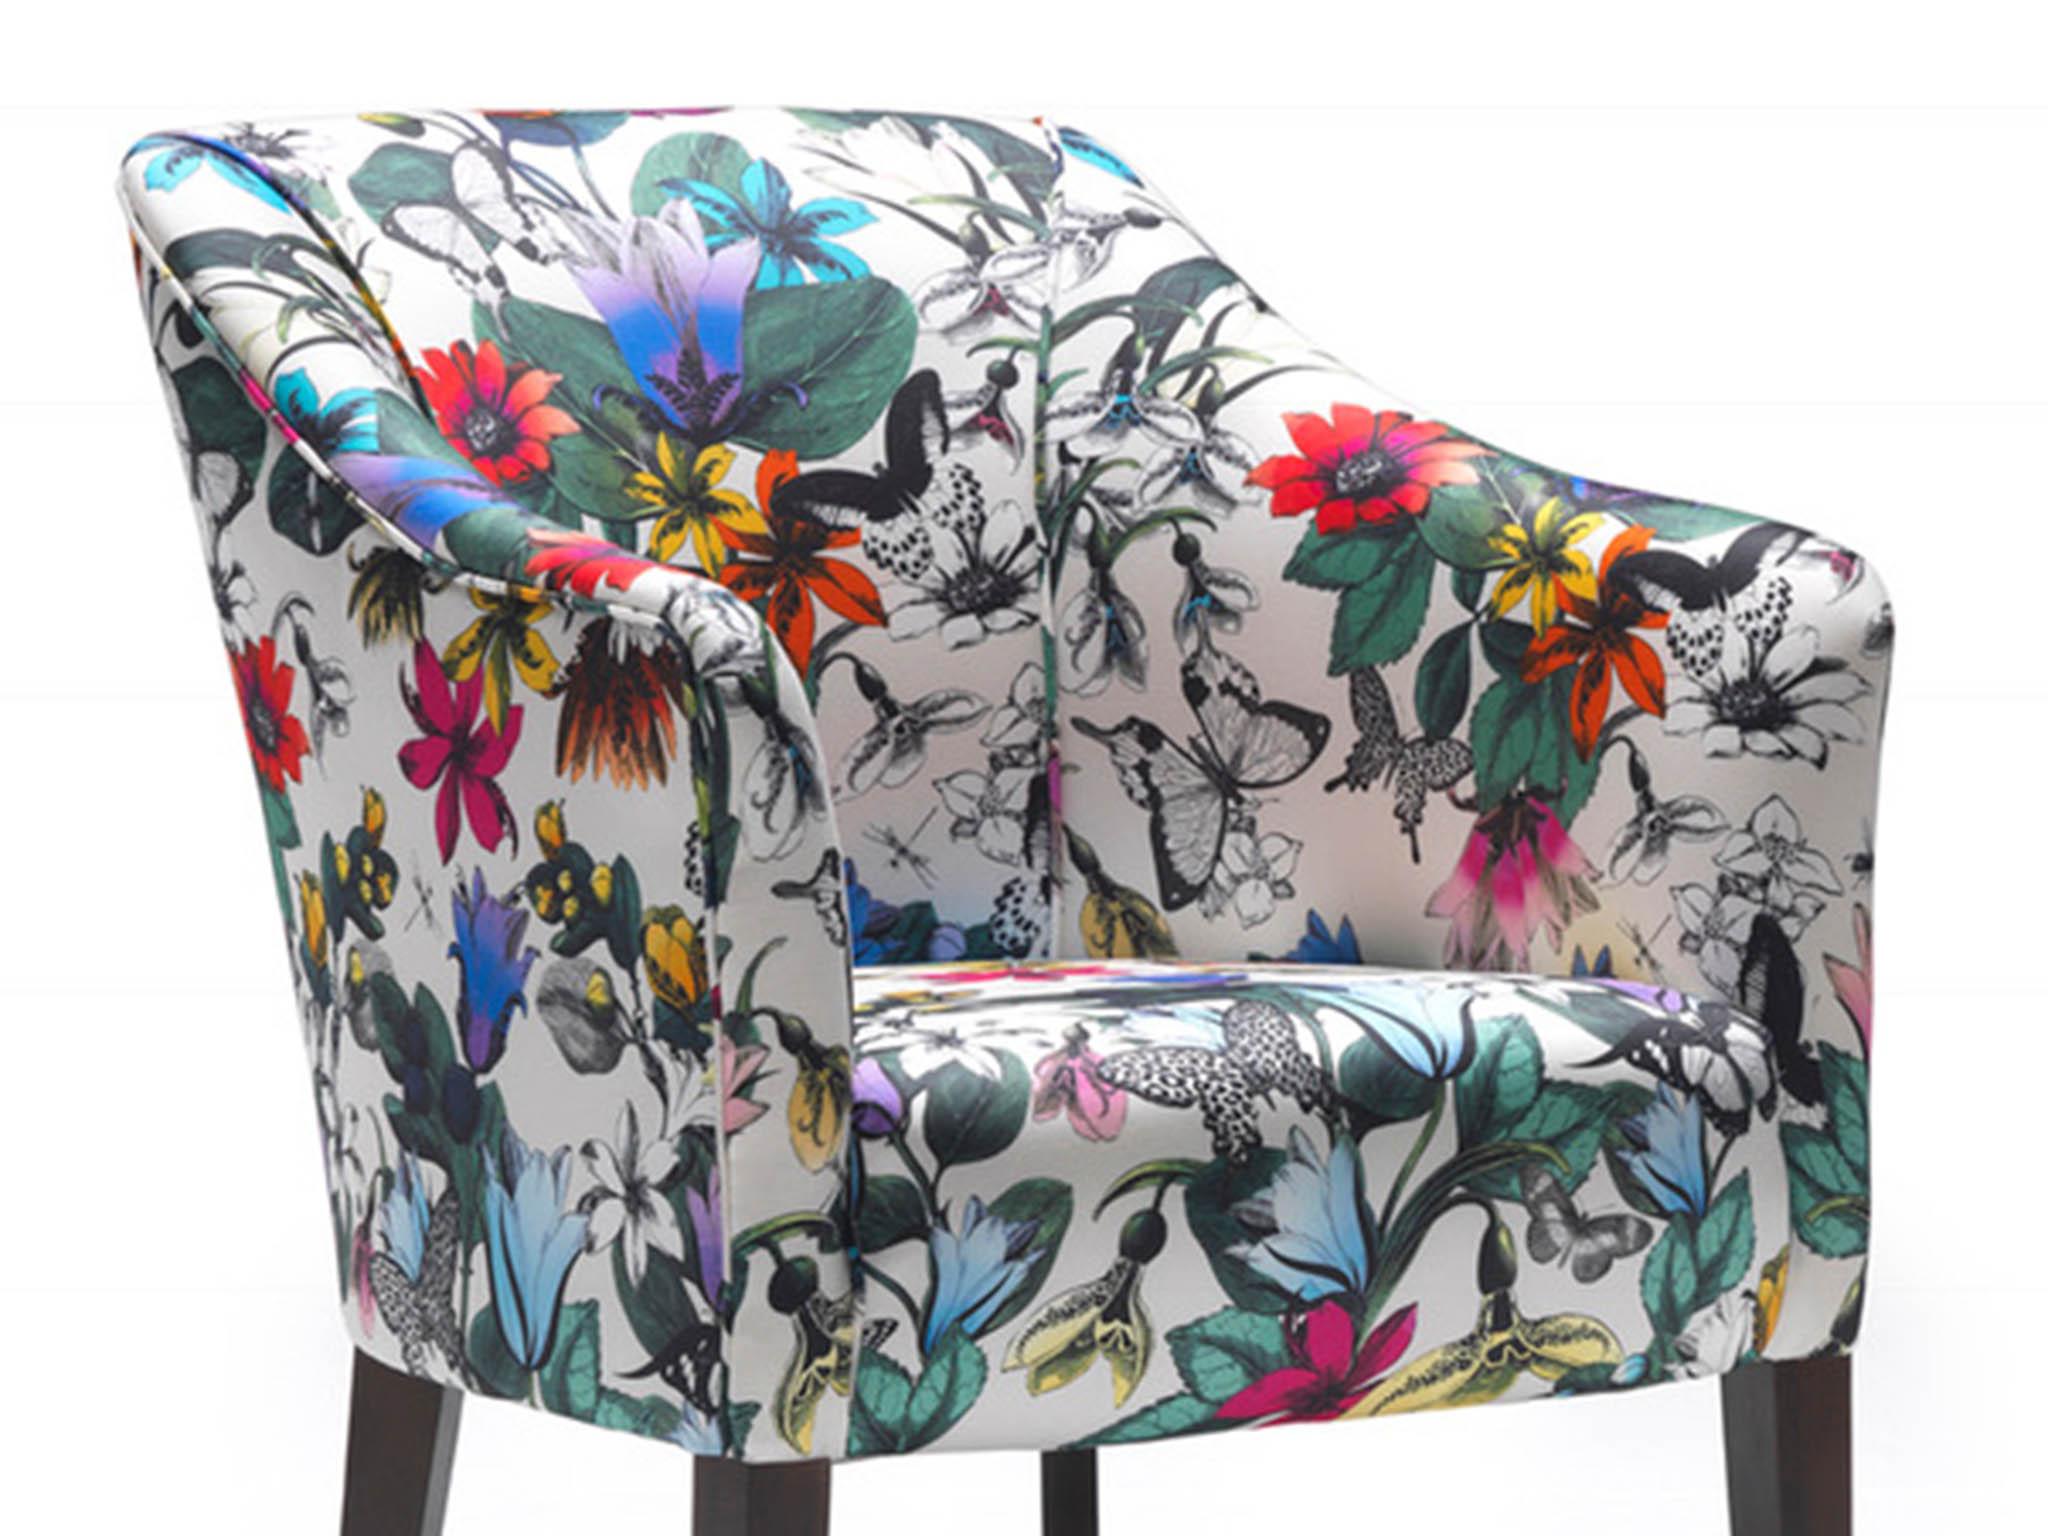 Petite Marguerite Chair by Sofa Workshop, now on sale for £768